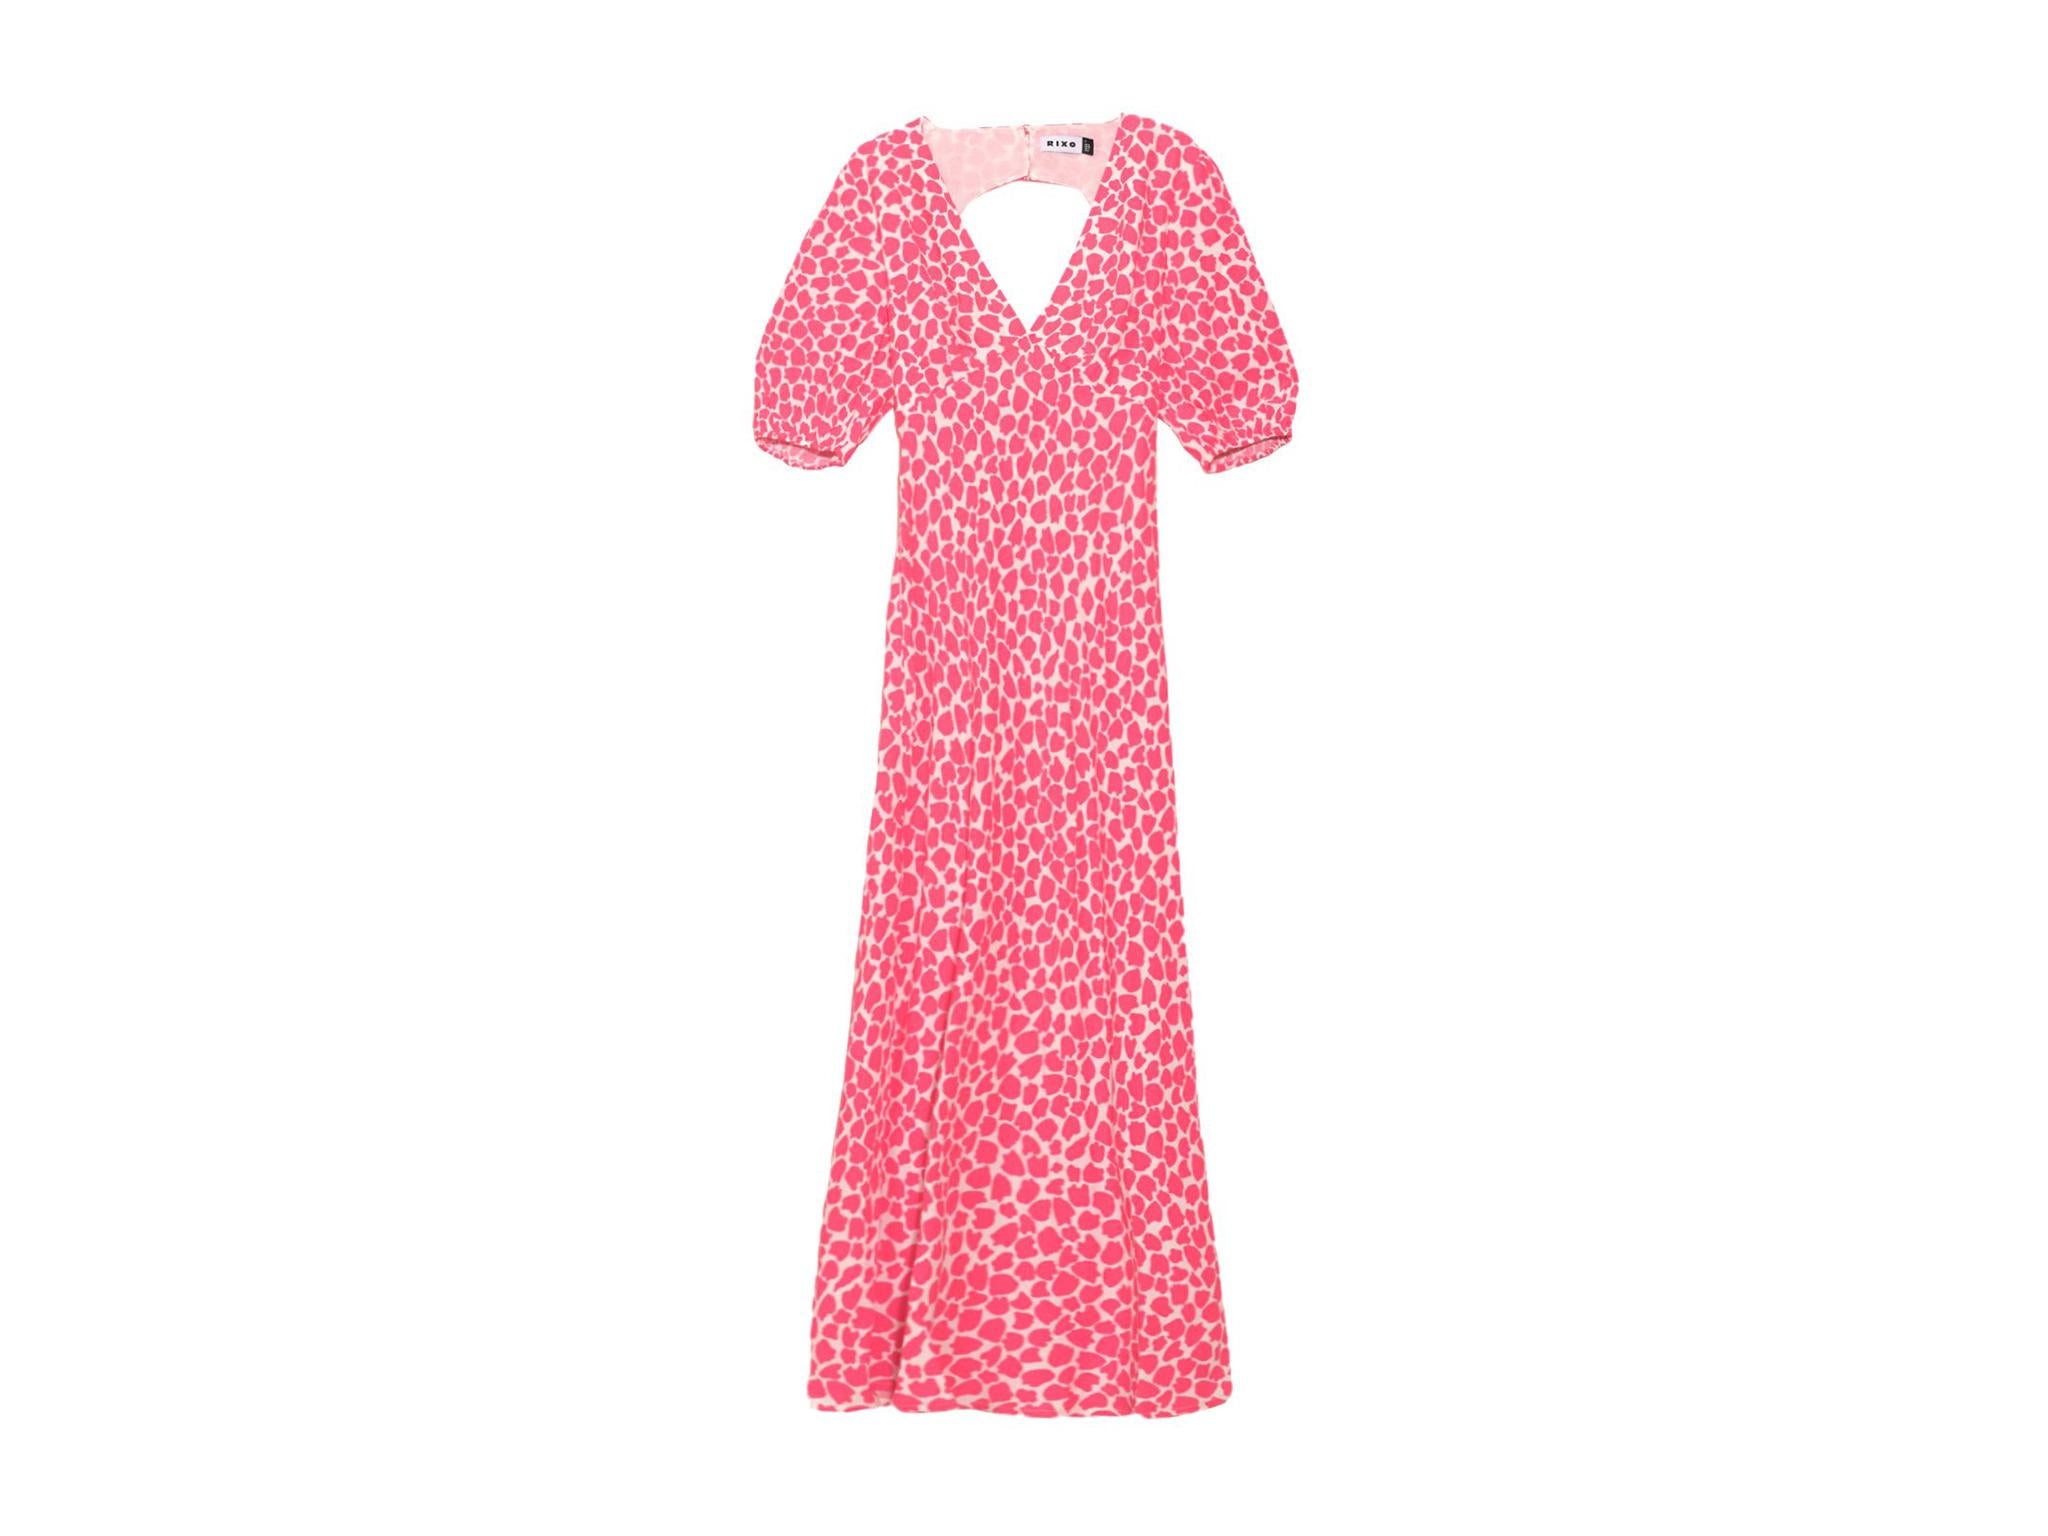 pink dresses to wear to a wedding